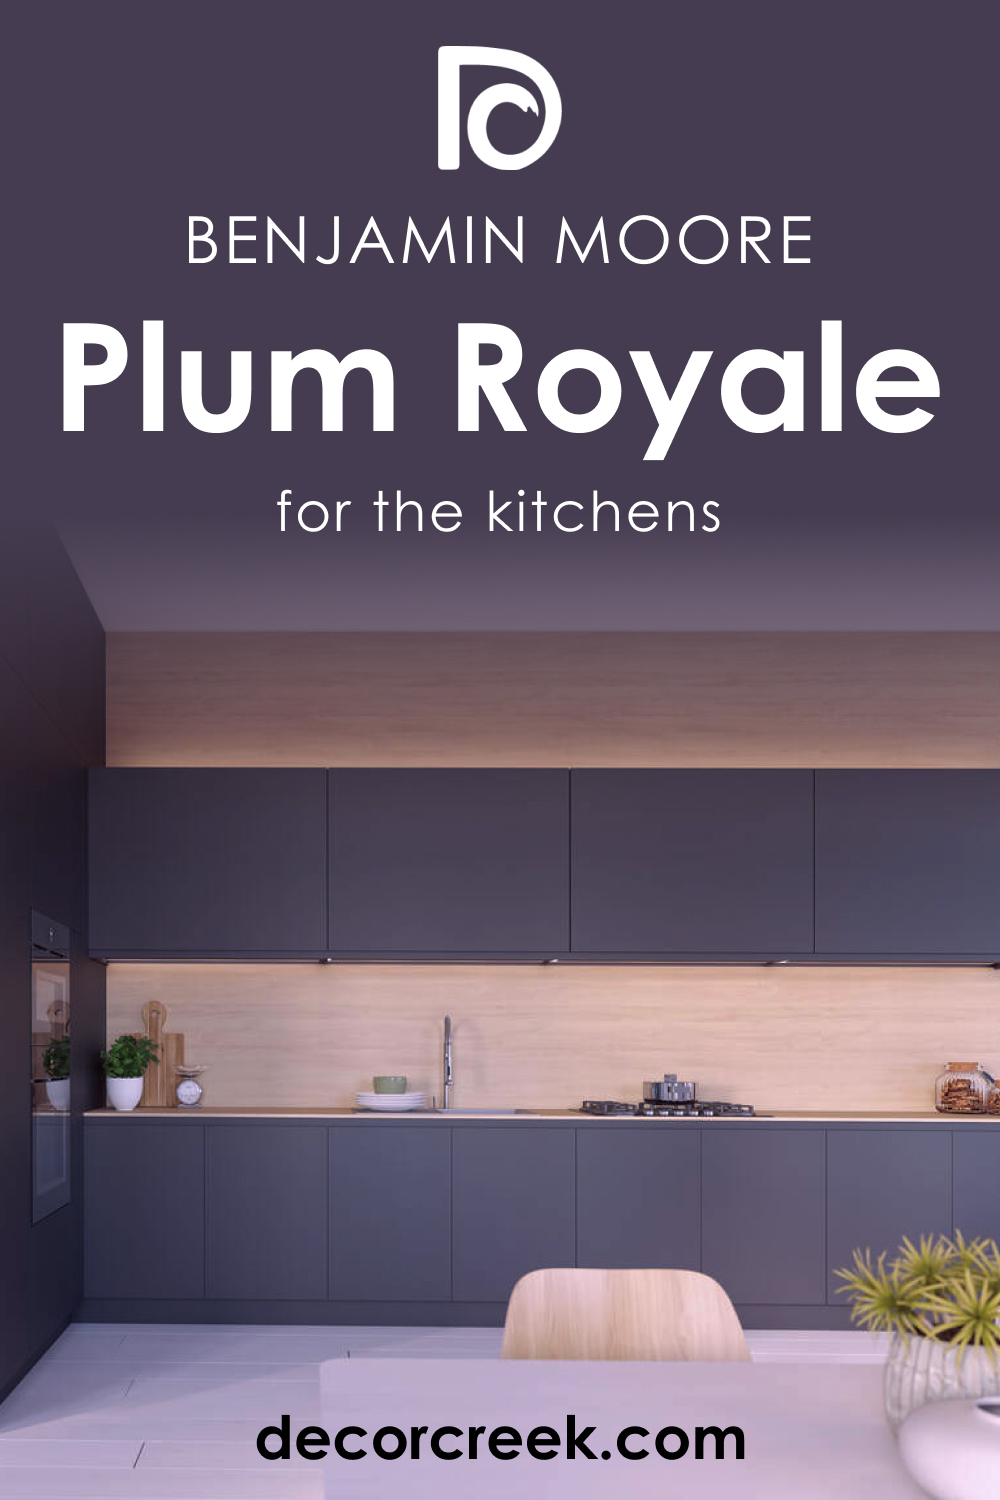 How to Use Plum Royale 2070-20 in the Kitchen?